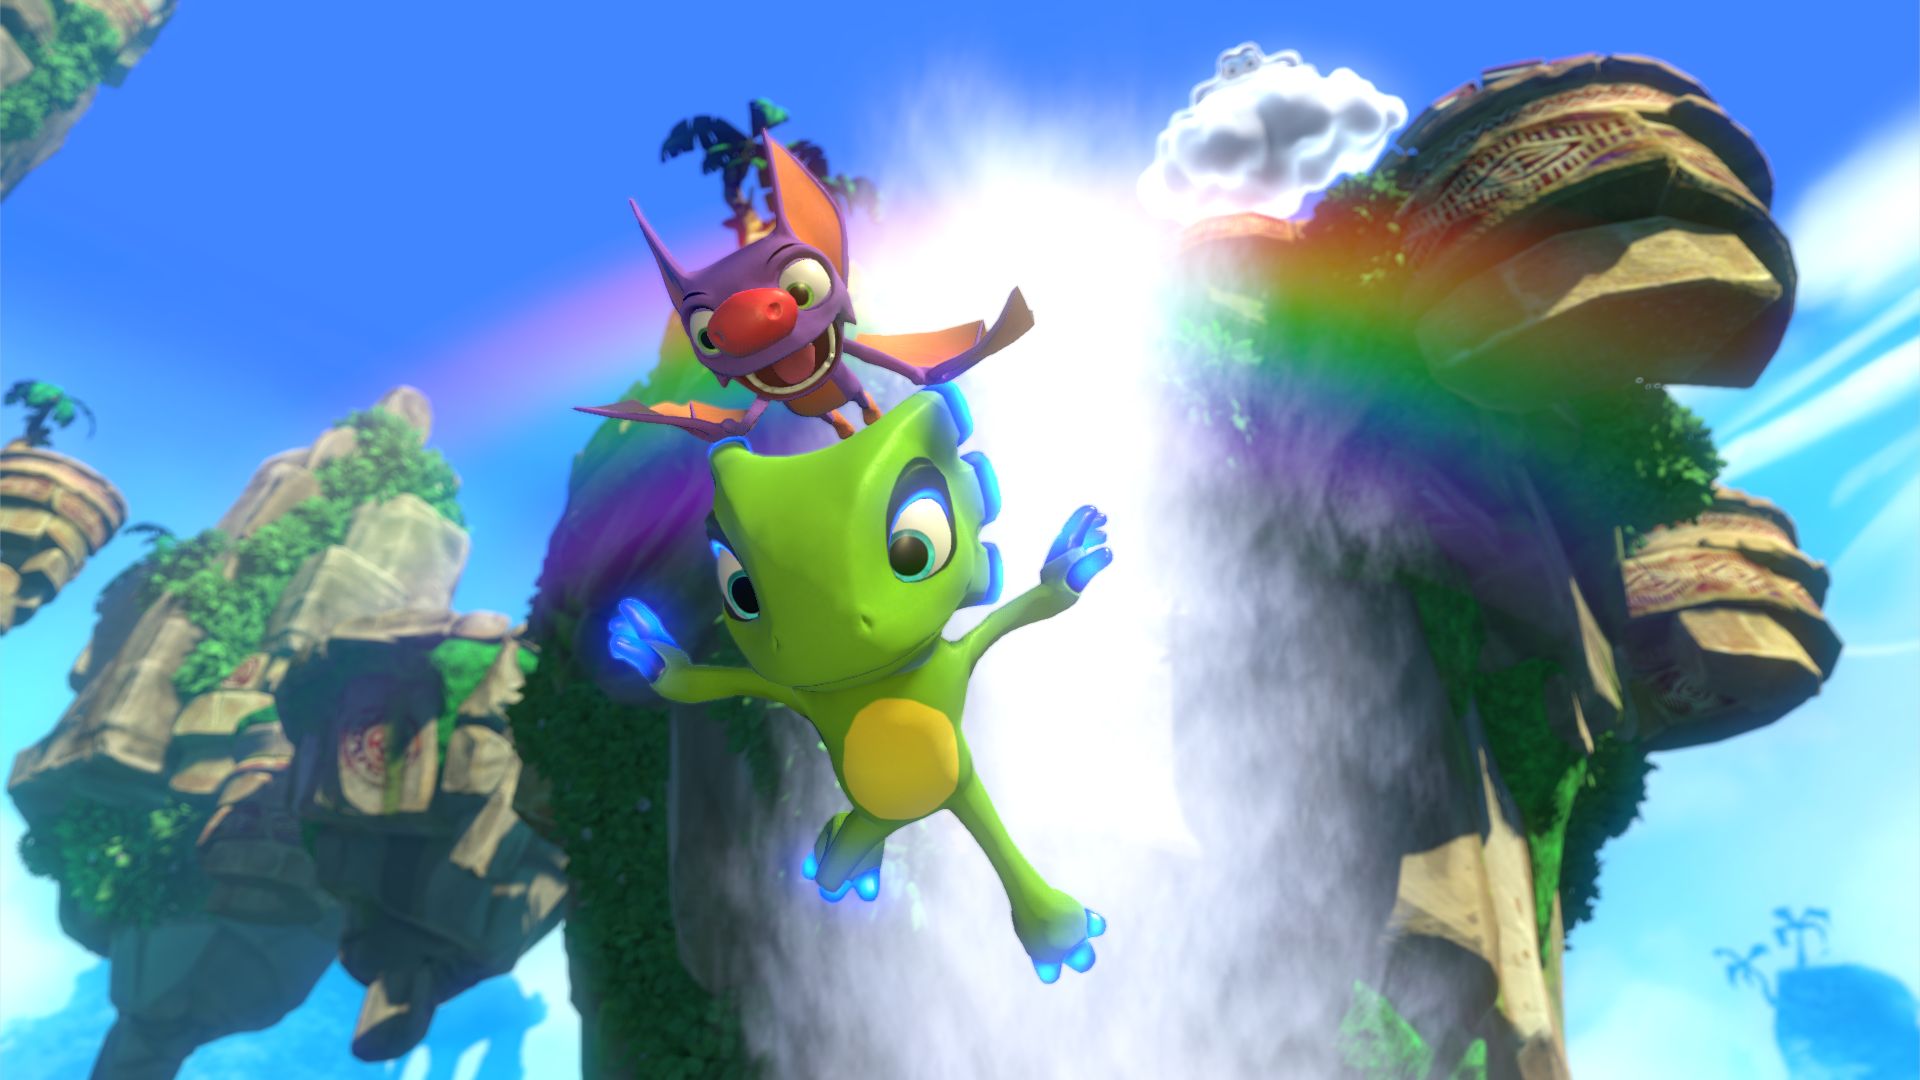 Yooka-Laylee Toybox codes sent to Kickstarter backers - here's a complete playthrough of it